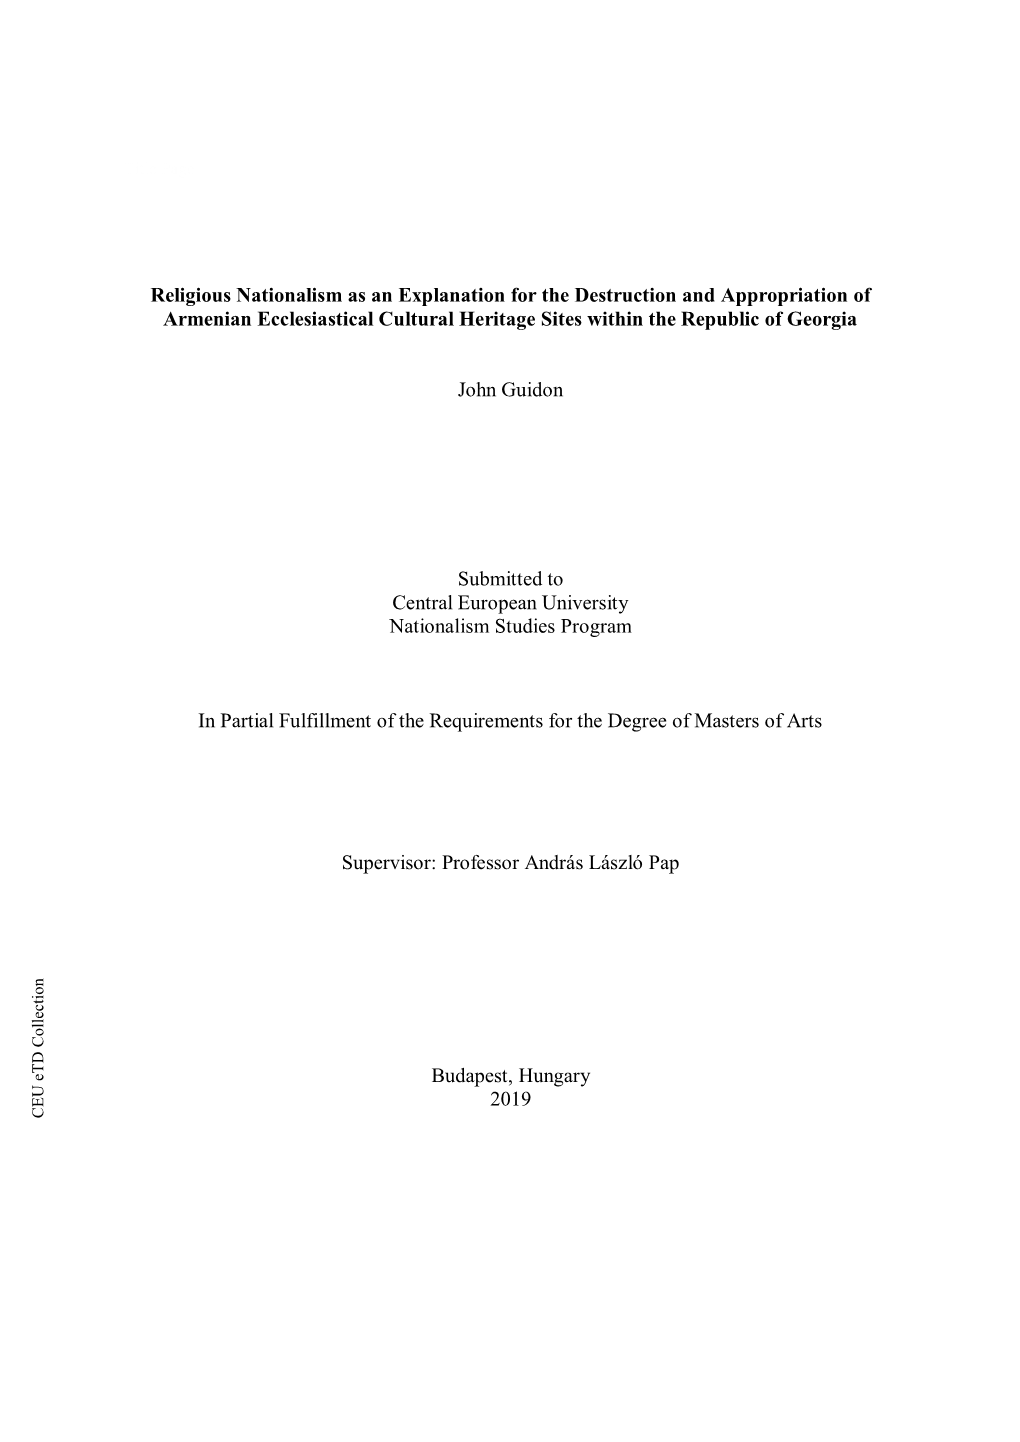 Religious Nationalism As an Explanation for the Destruction and Appropriation of Armenian Ecclesiastical Cultural Heritage Sites Within the Republic of Georgia